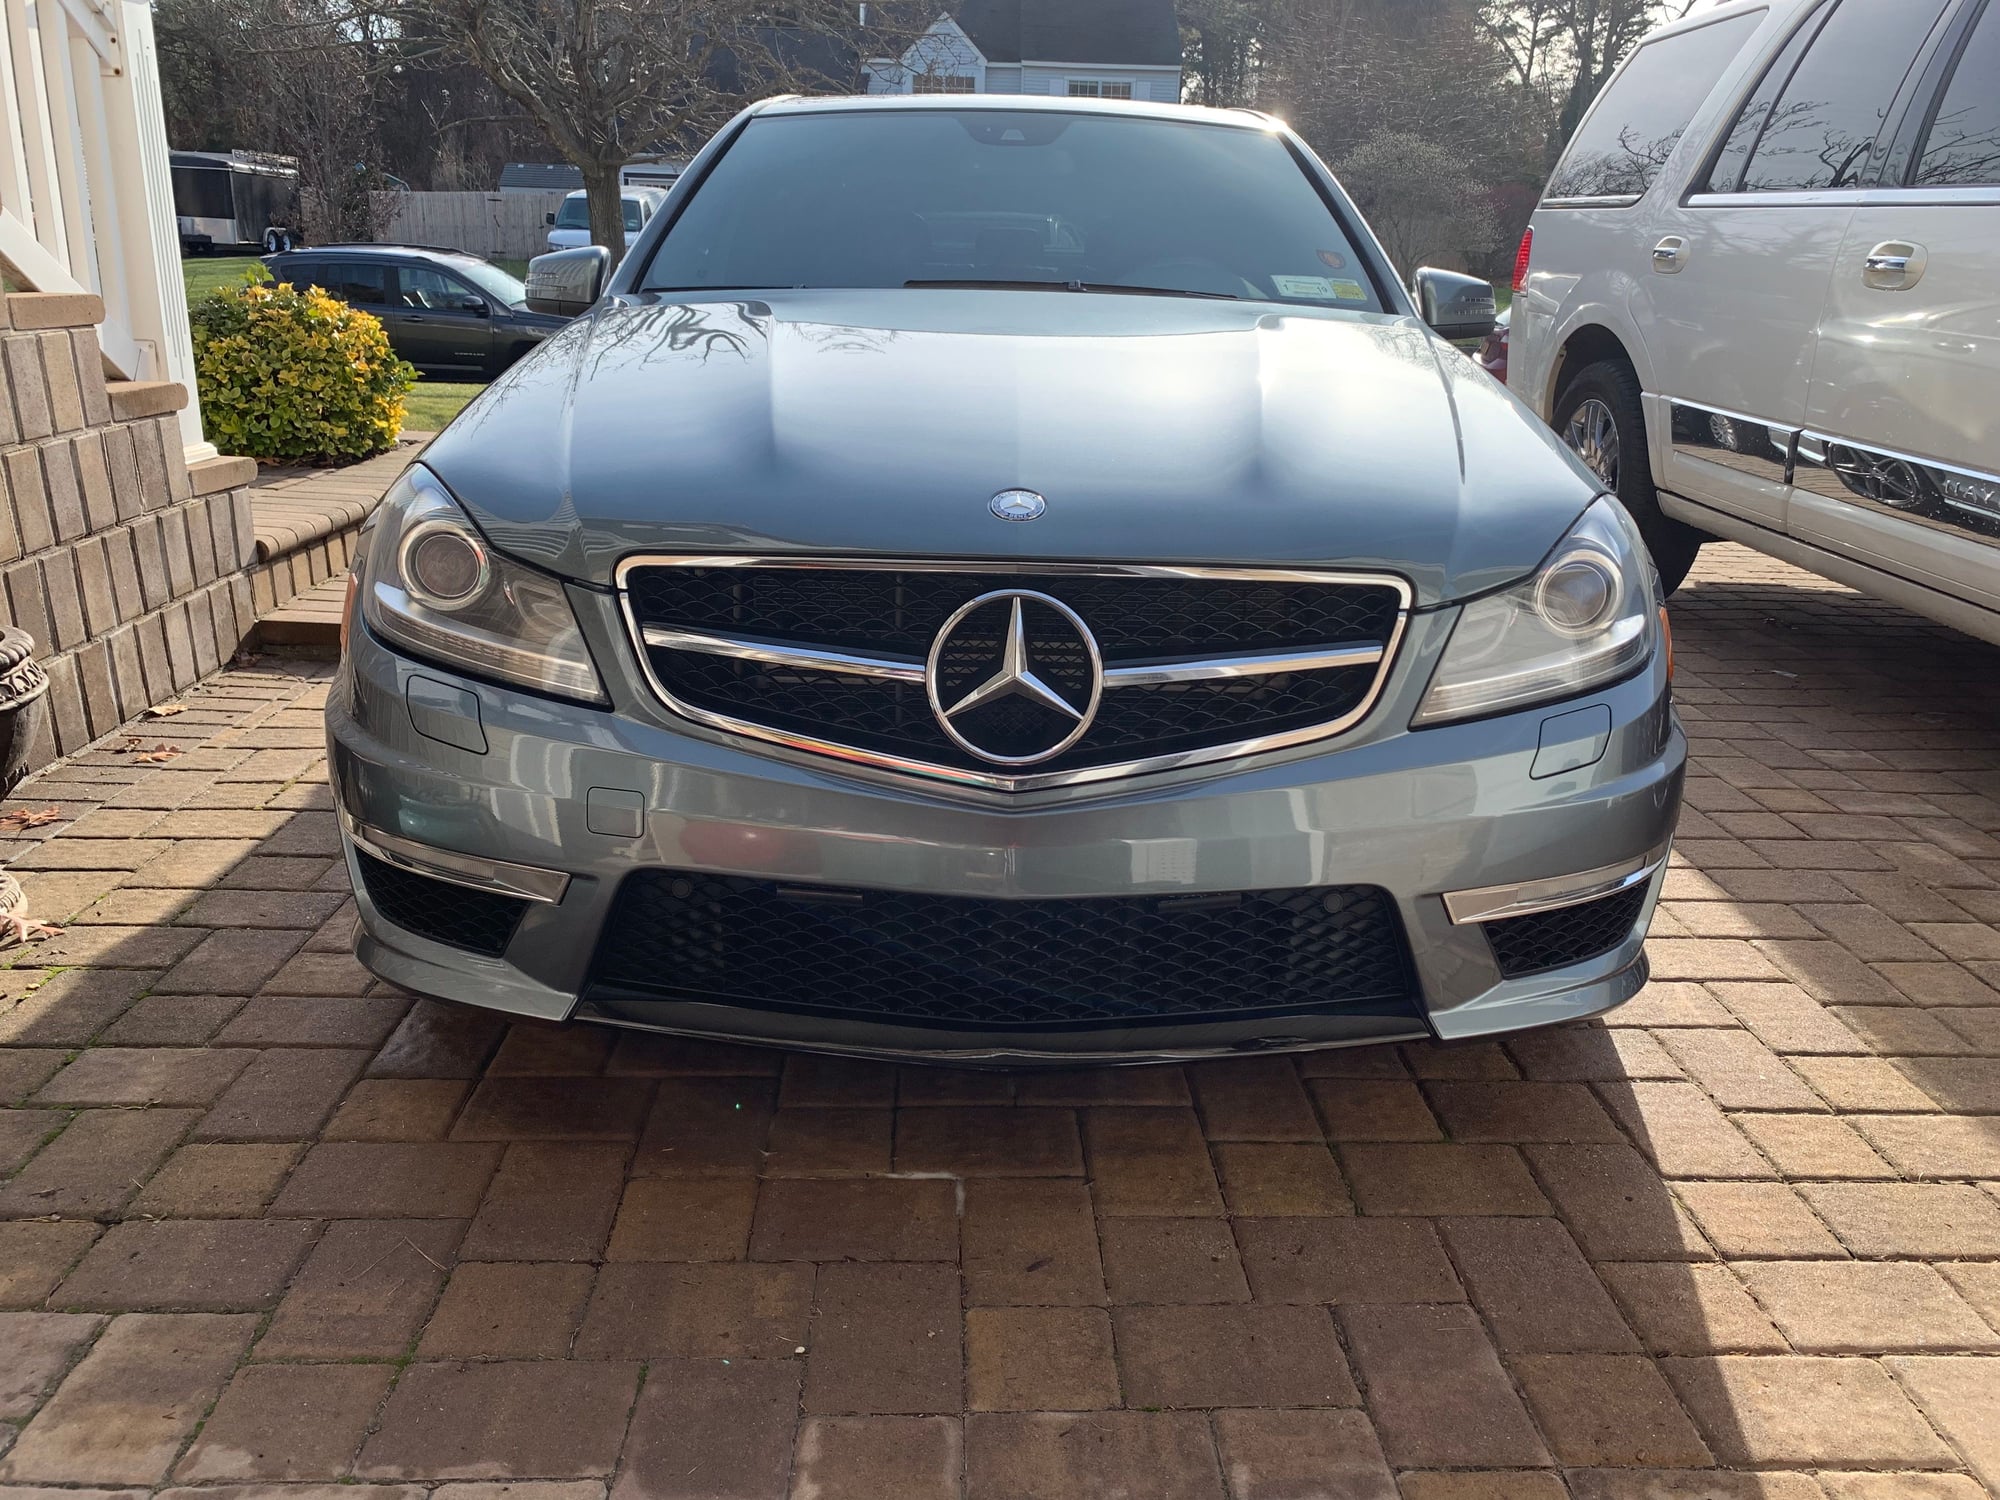 2012 Mercedes-Benz C63 AMG - 2012 Mercedes C63 AMG - Used - VIN Upon request - 40,000 Miles - 8 cyl - 2WD - Automatic - Sedan - Gray - Port Jeff, NY 11777, United States